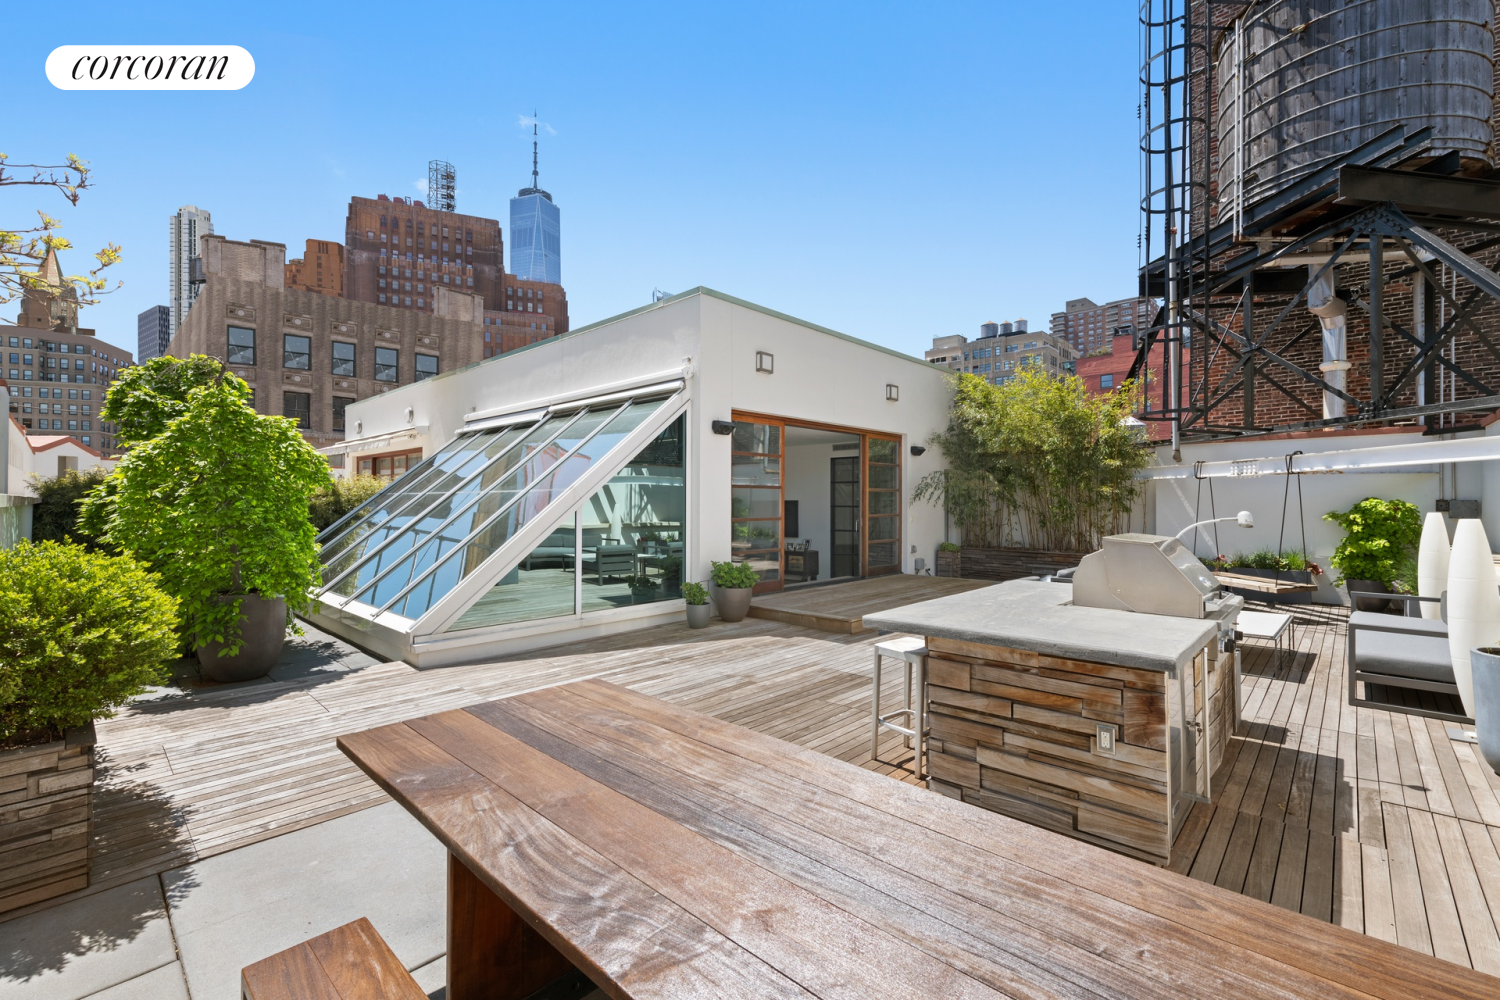 140 Franklin Street Phc, Tribeca, Downtown, NYC - 3 Bedrooms  
4.5 Bathrooms  
10 Rooms - 